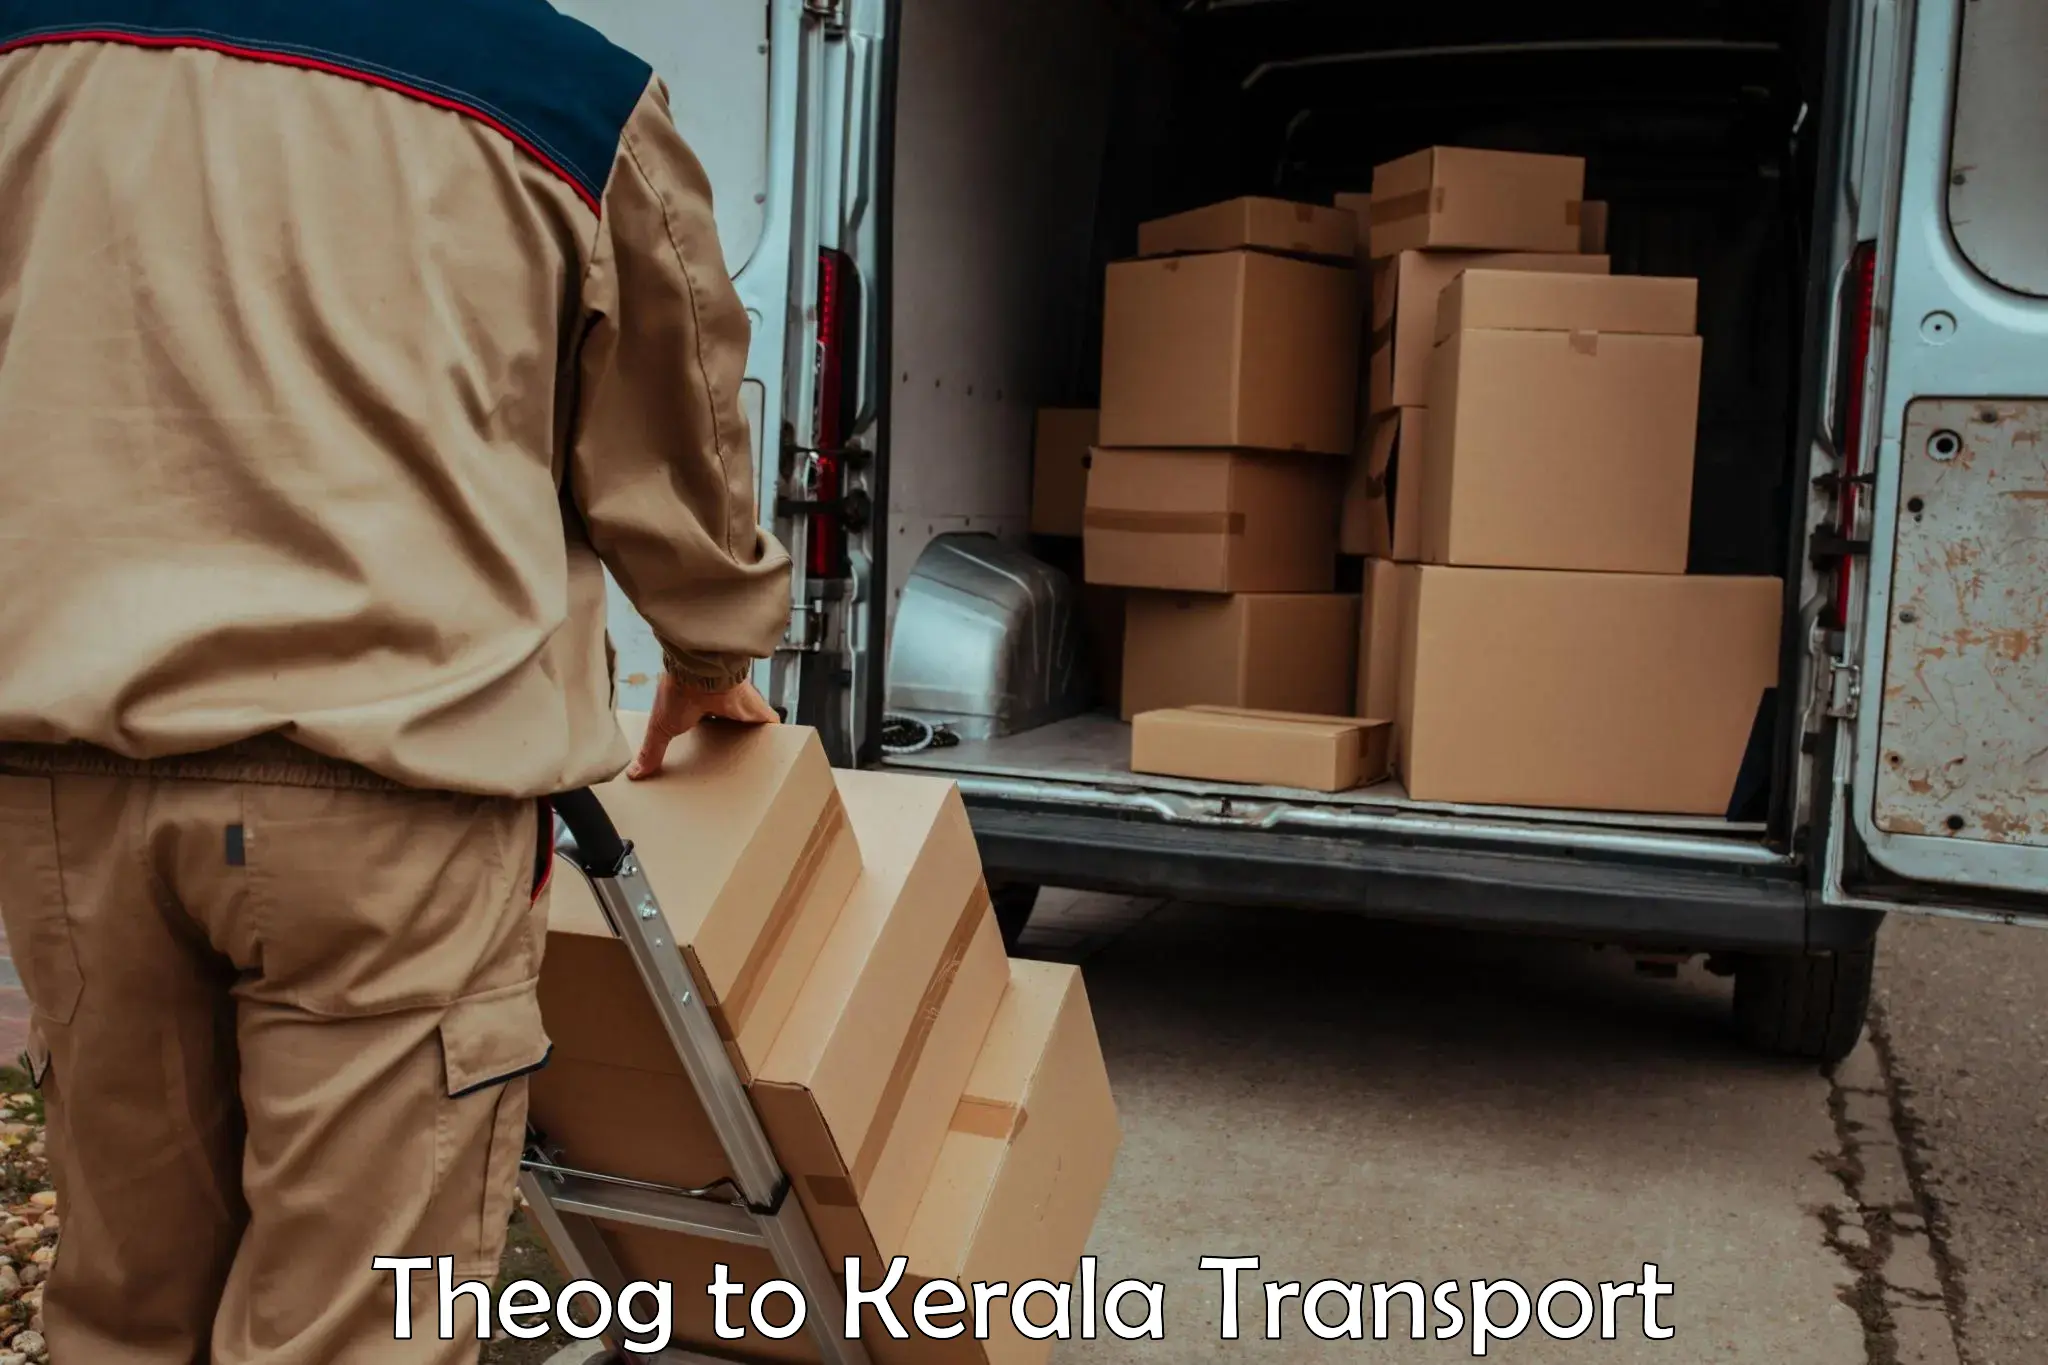 Cargo transport services Theog to Kerala